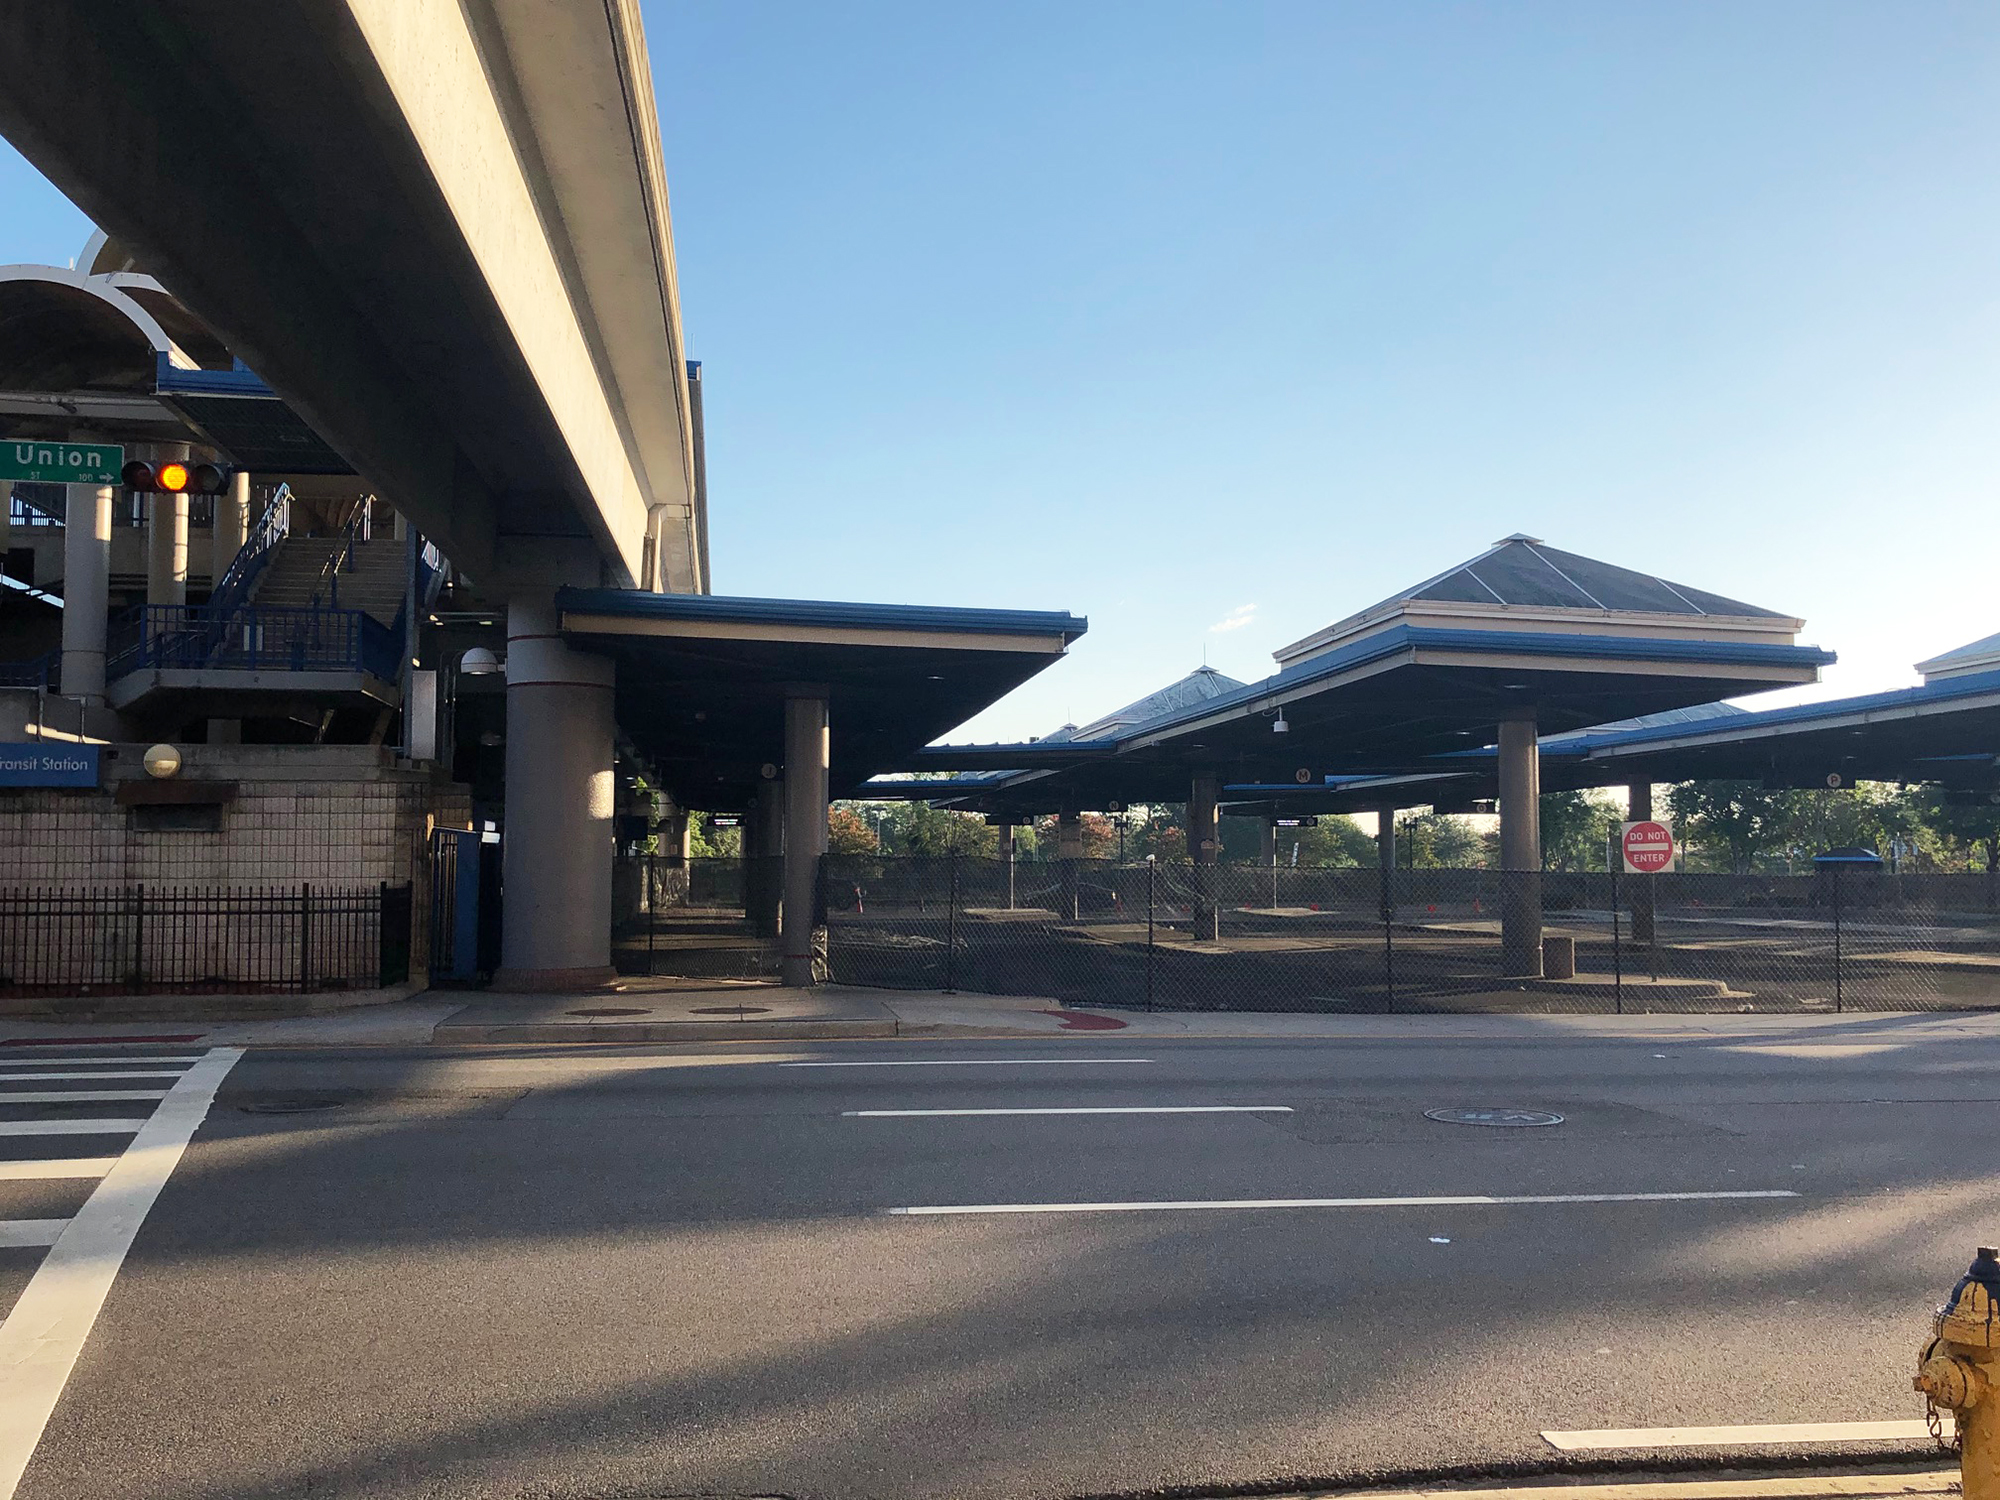 The Jacksonville Transportation Authority is preparing the east side of the Rosa L. Parks Transit Station for potential development.